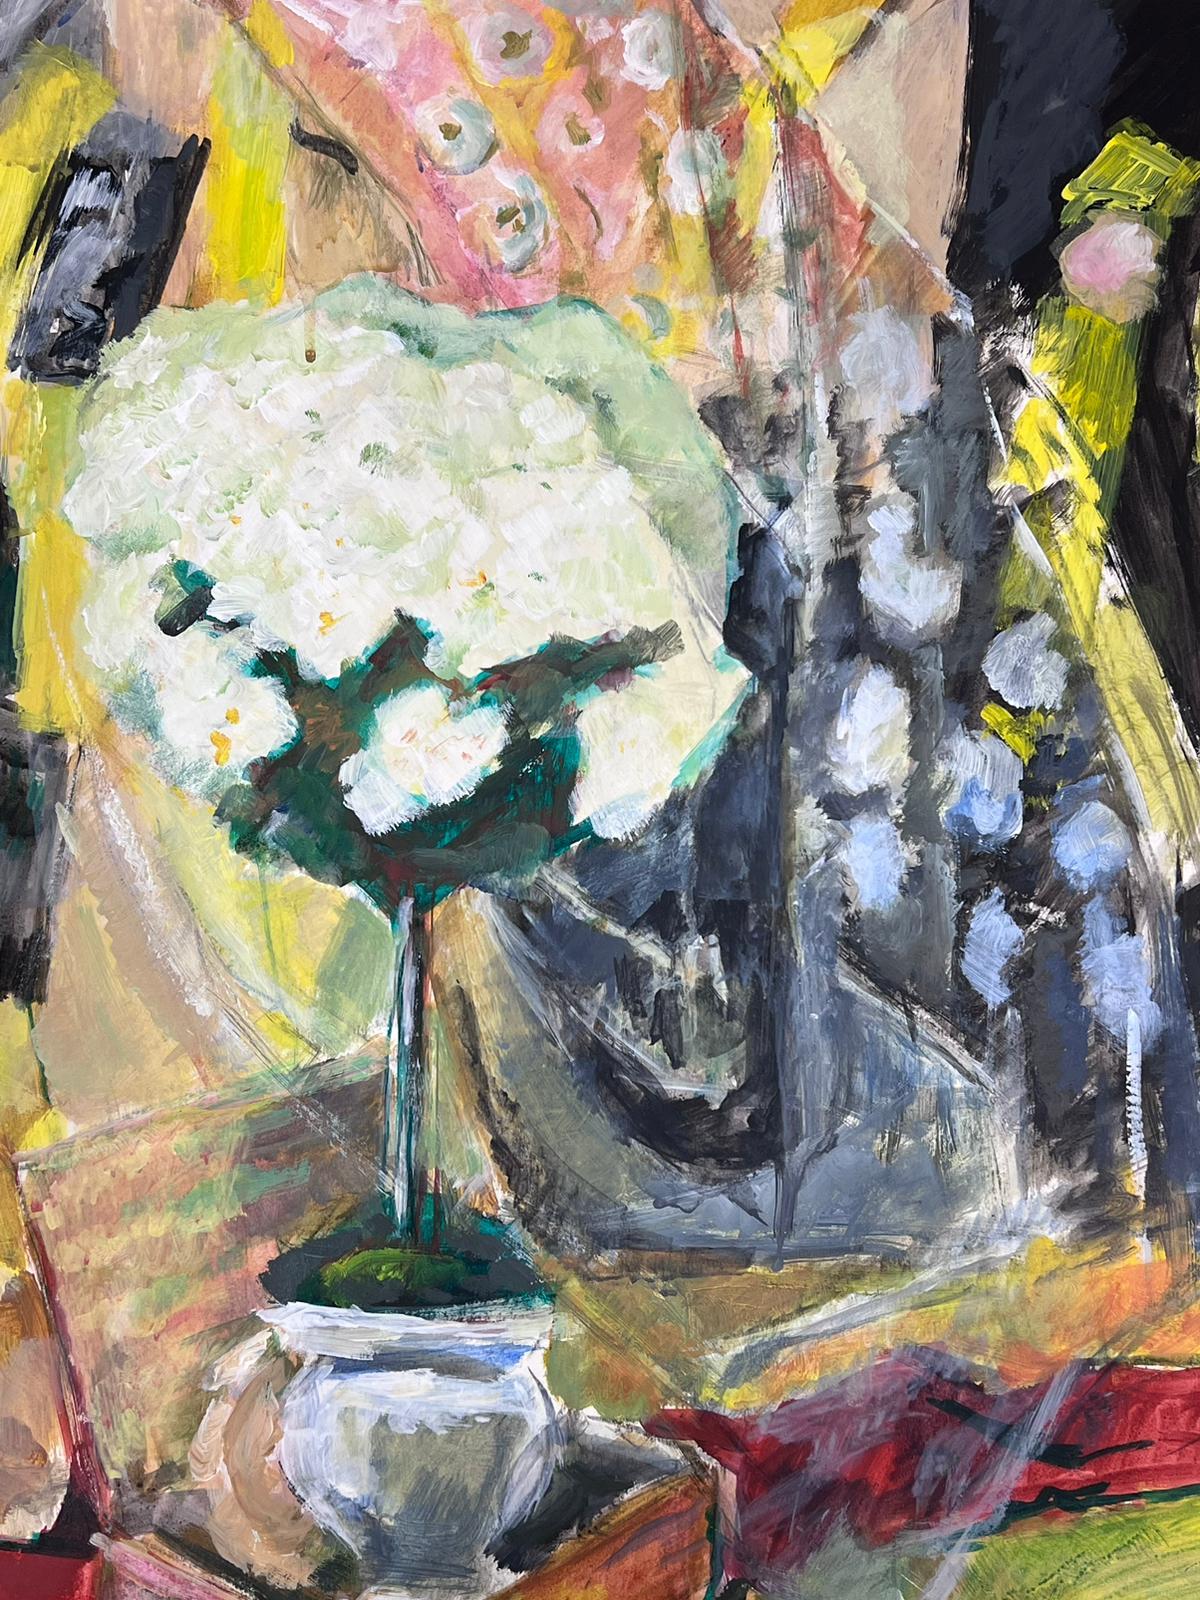 White Flower Still life
by Guy Nicod
(French 1923 - 2021)
oil on artist paper, unframed
painting : 25 x 19.5 inches
provenance: artists estate, France
condition: very good and sound condition